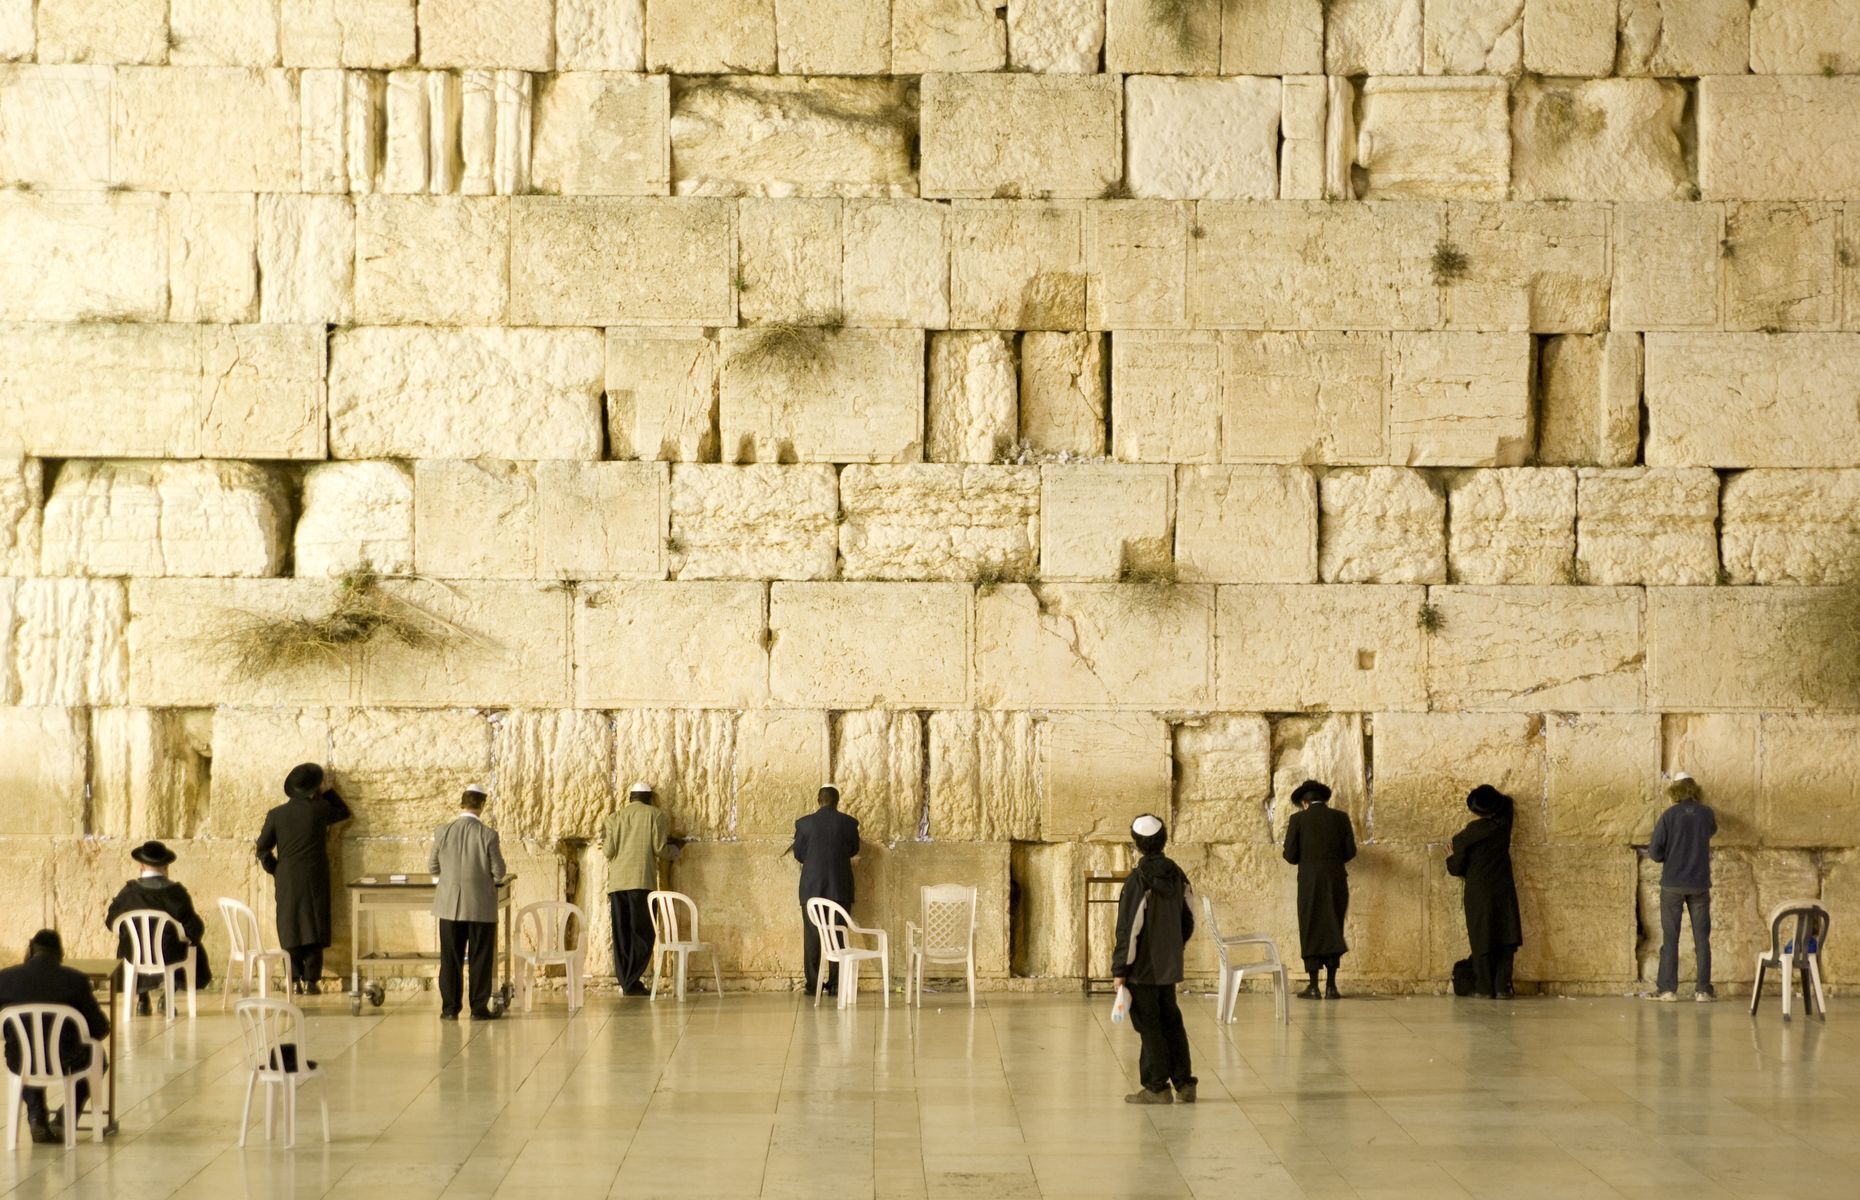 <p>The Wailing Wall is the only surviving portion of Jerusalem’s <a href="https://www.mfa.gov.il/mfa/aboutisrael/history/pages/history-%20the%20second%20temple.aspx" rel="noreferrer noopener">Second Temple</a>, destroyed by Rome in the year 70. The remnant remains a sacred site for Jews. <a href="https://www.touristisrael.com/western-wall/15946/" rel="noreferrer noopener">Thousands of people come to the prayer areas, segregated by gender, every day</a>, while record numbers visit on Jewish holidays. Tourists can also access the site, except on Shabbat. According to tradition, visitors write their wishes on a piece of paper and bury them in the crevices of the wall.</p>